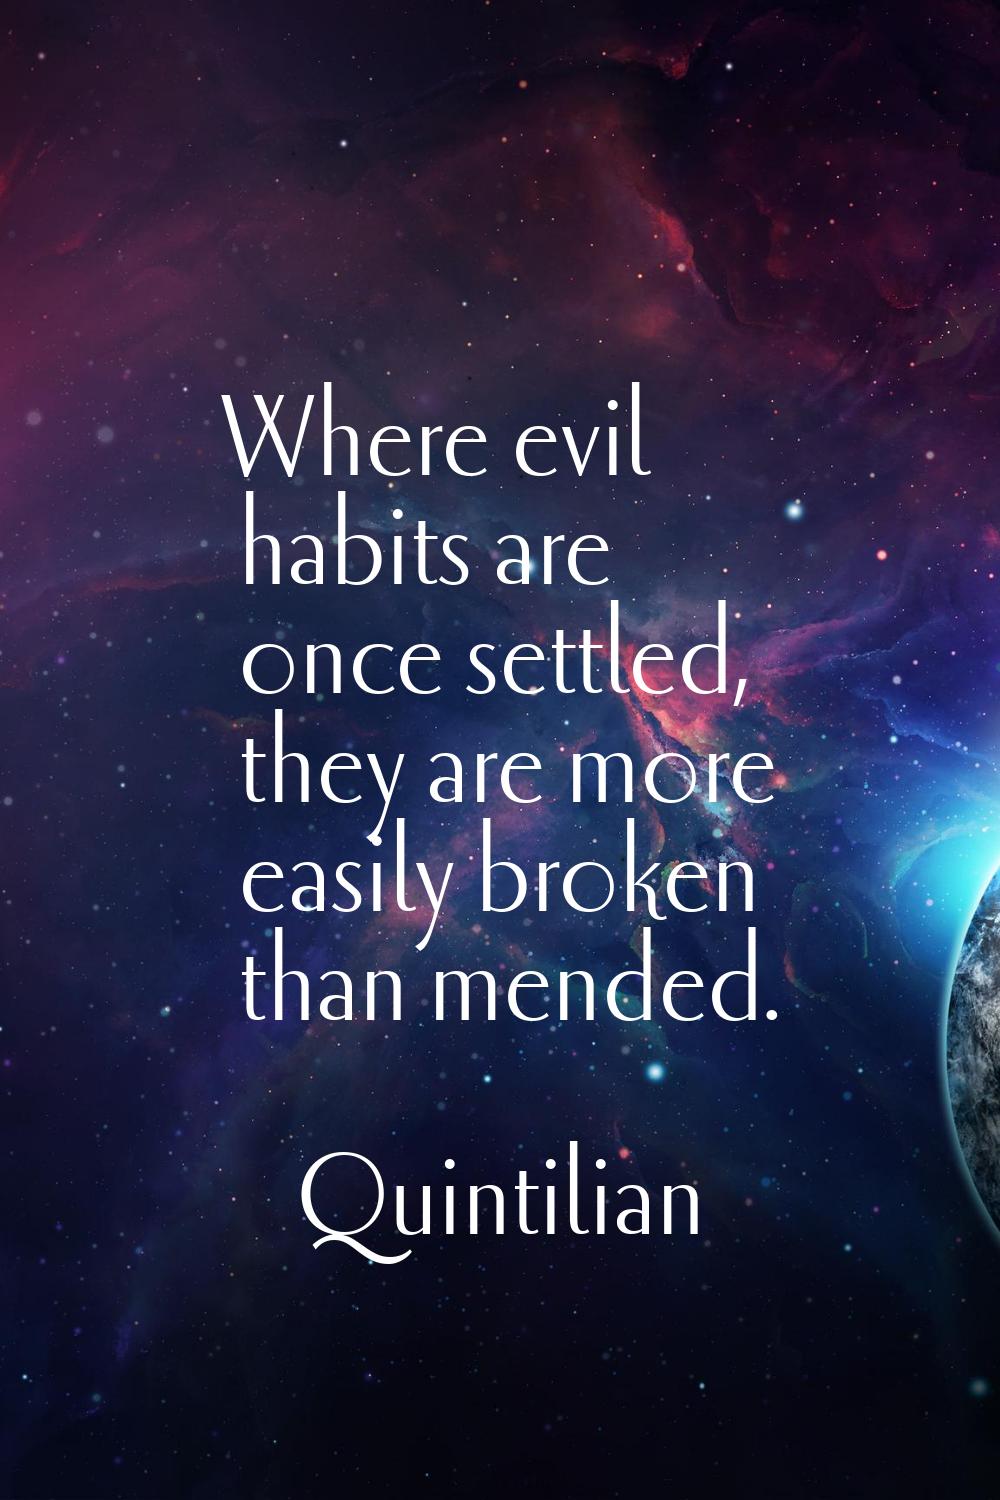 Where evil habits are once settled, they are more easily broken than mended.